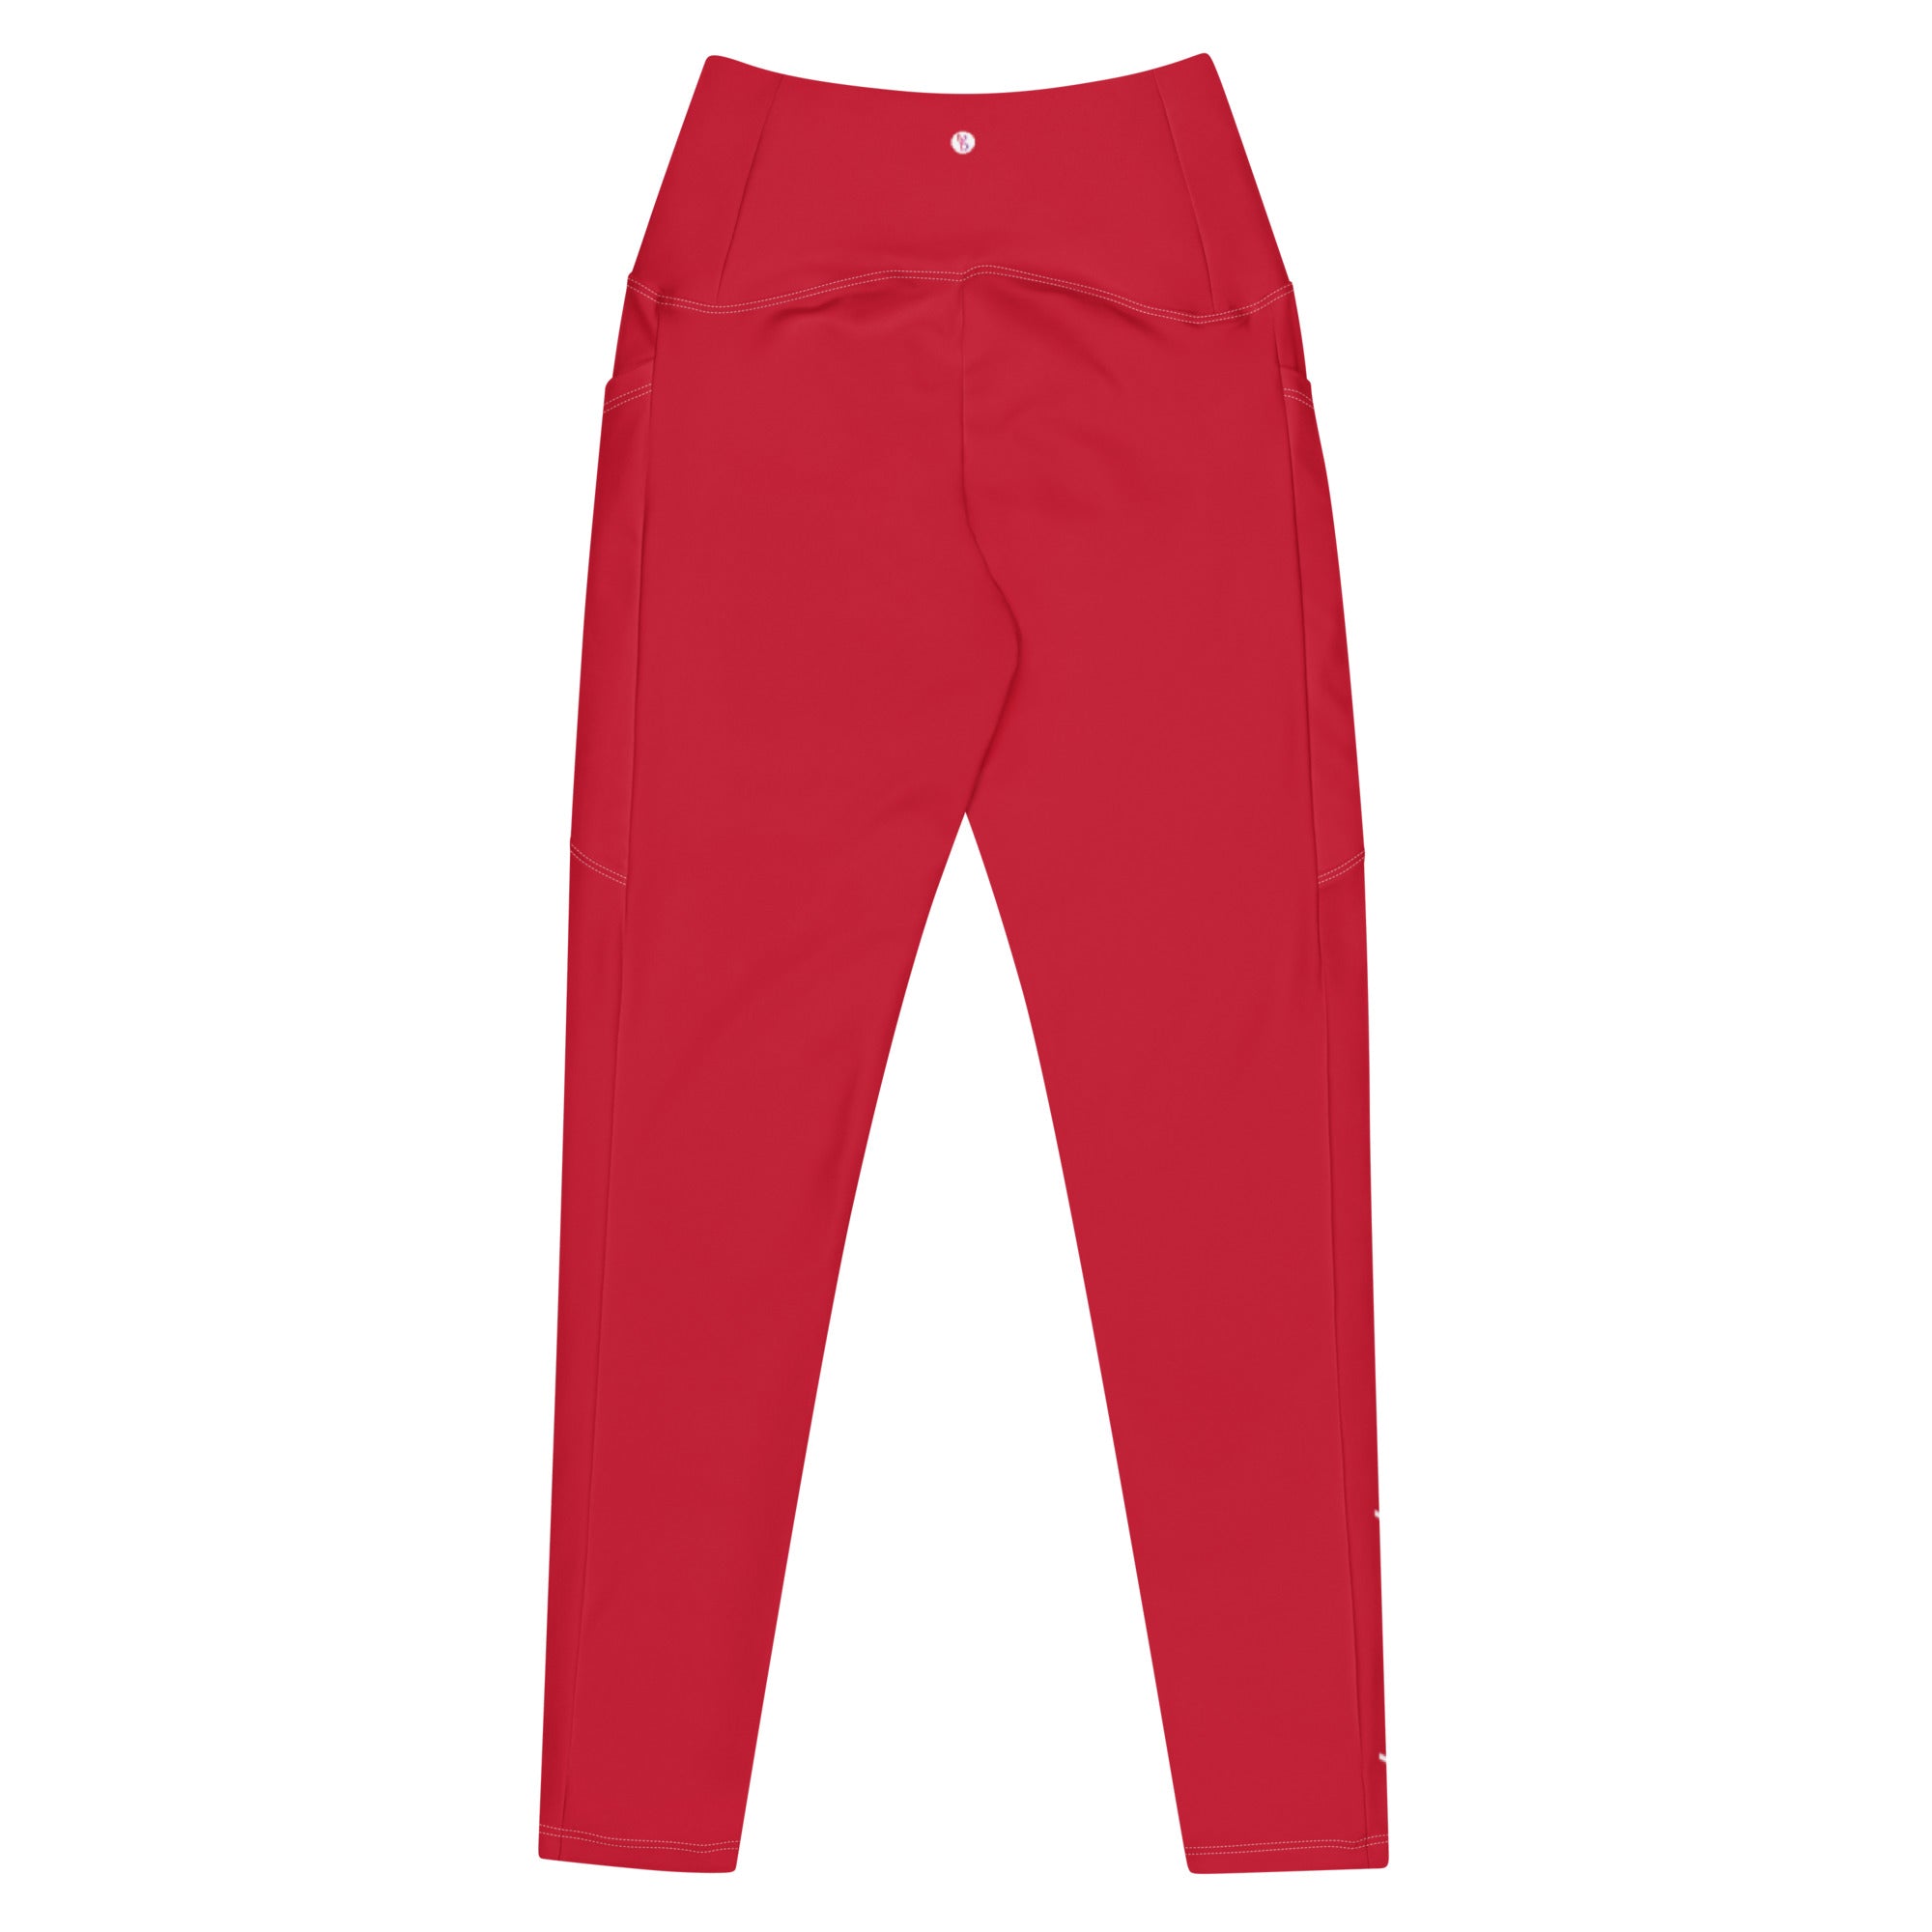 IDEOLOGY Womens Red Moisture Wicking Pocketed Upf 50 Compression